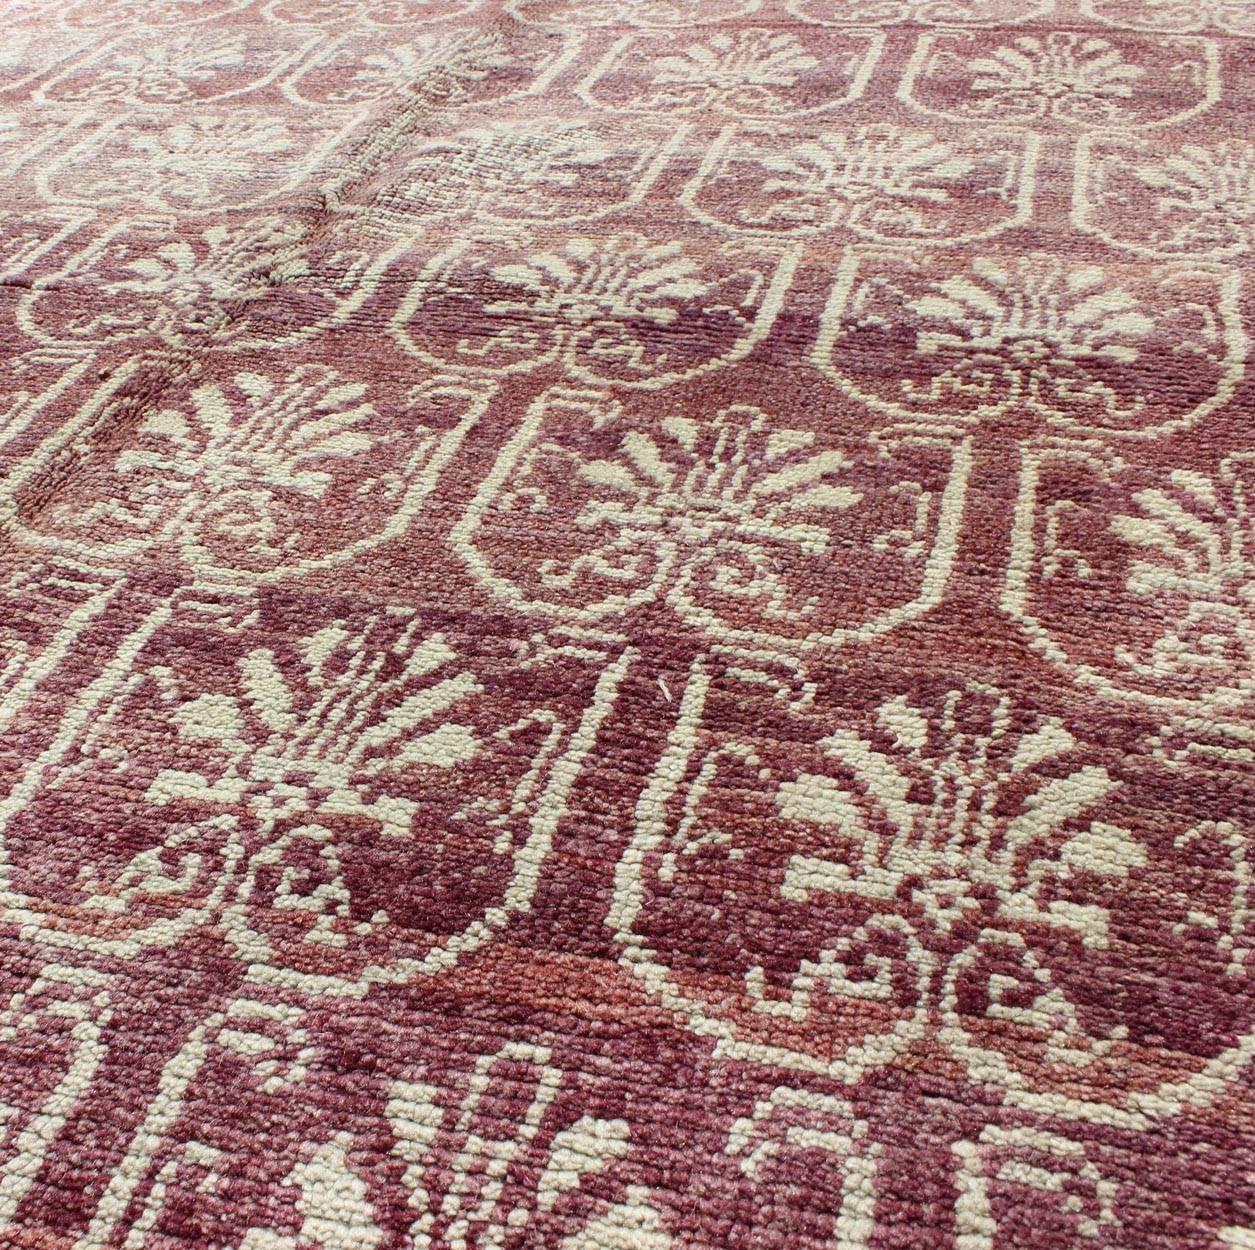 20th Century Unique Turkish Tulu Rug with All-Over Paisley Design in Light Aubergine & Ivory